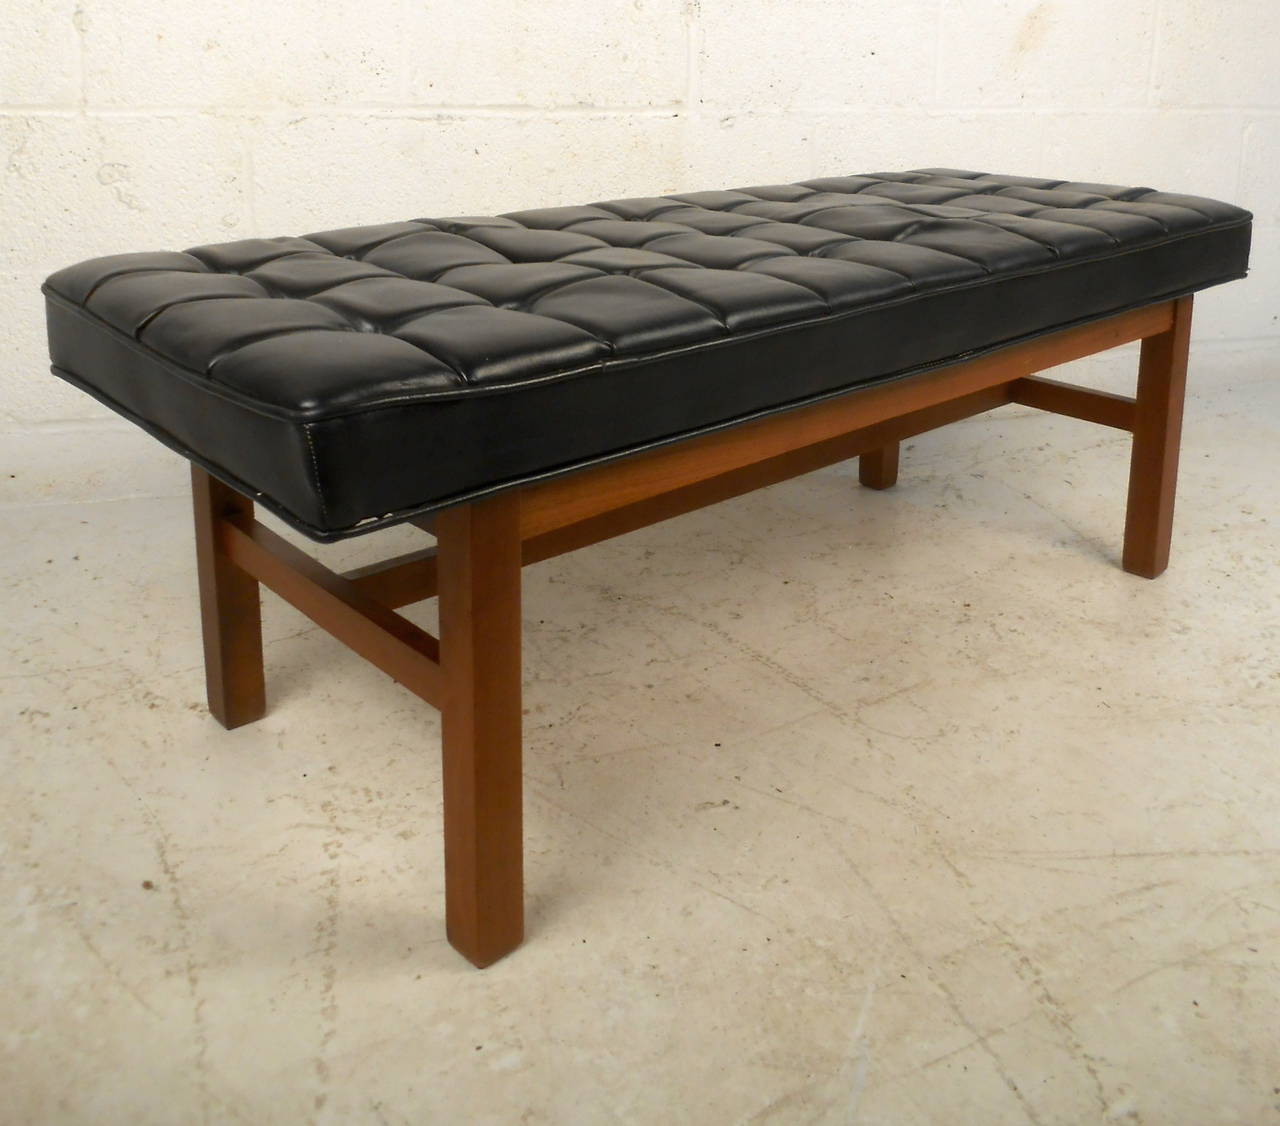 This Mid-Century bench features a tufted black vinyl upholstery and solid walnut frame which offers a comfortable modern access to any home or office space.

Please confirm item location (NY or NJ) with dealer.